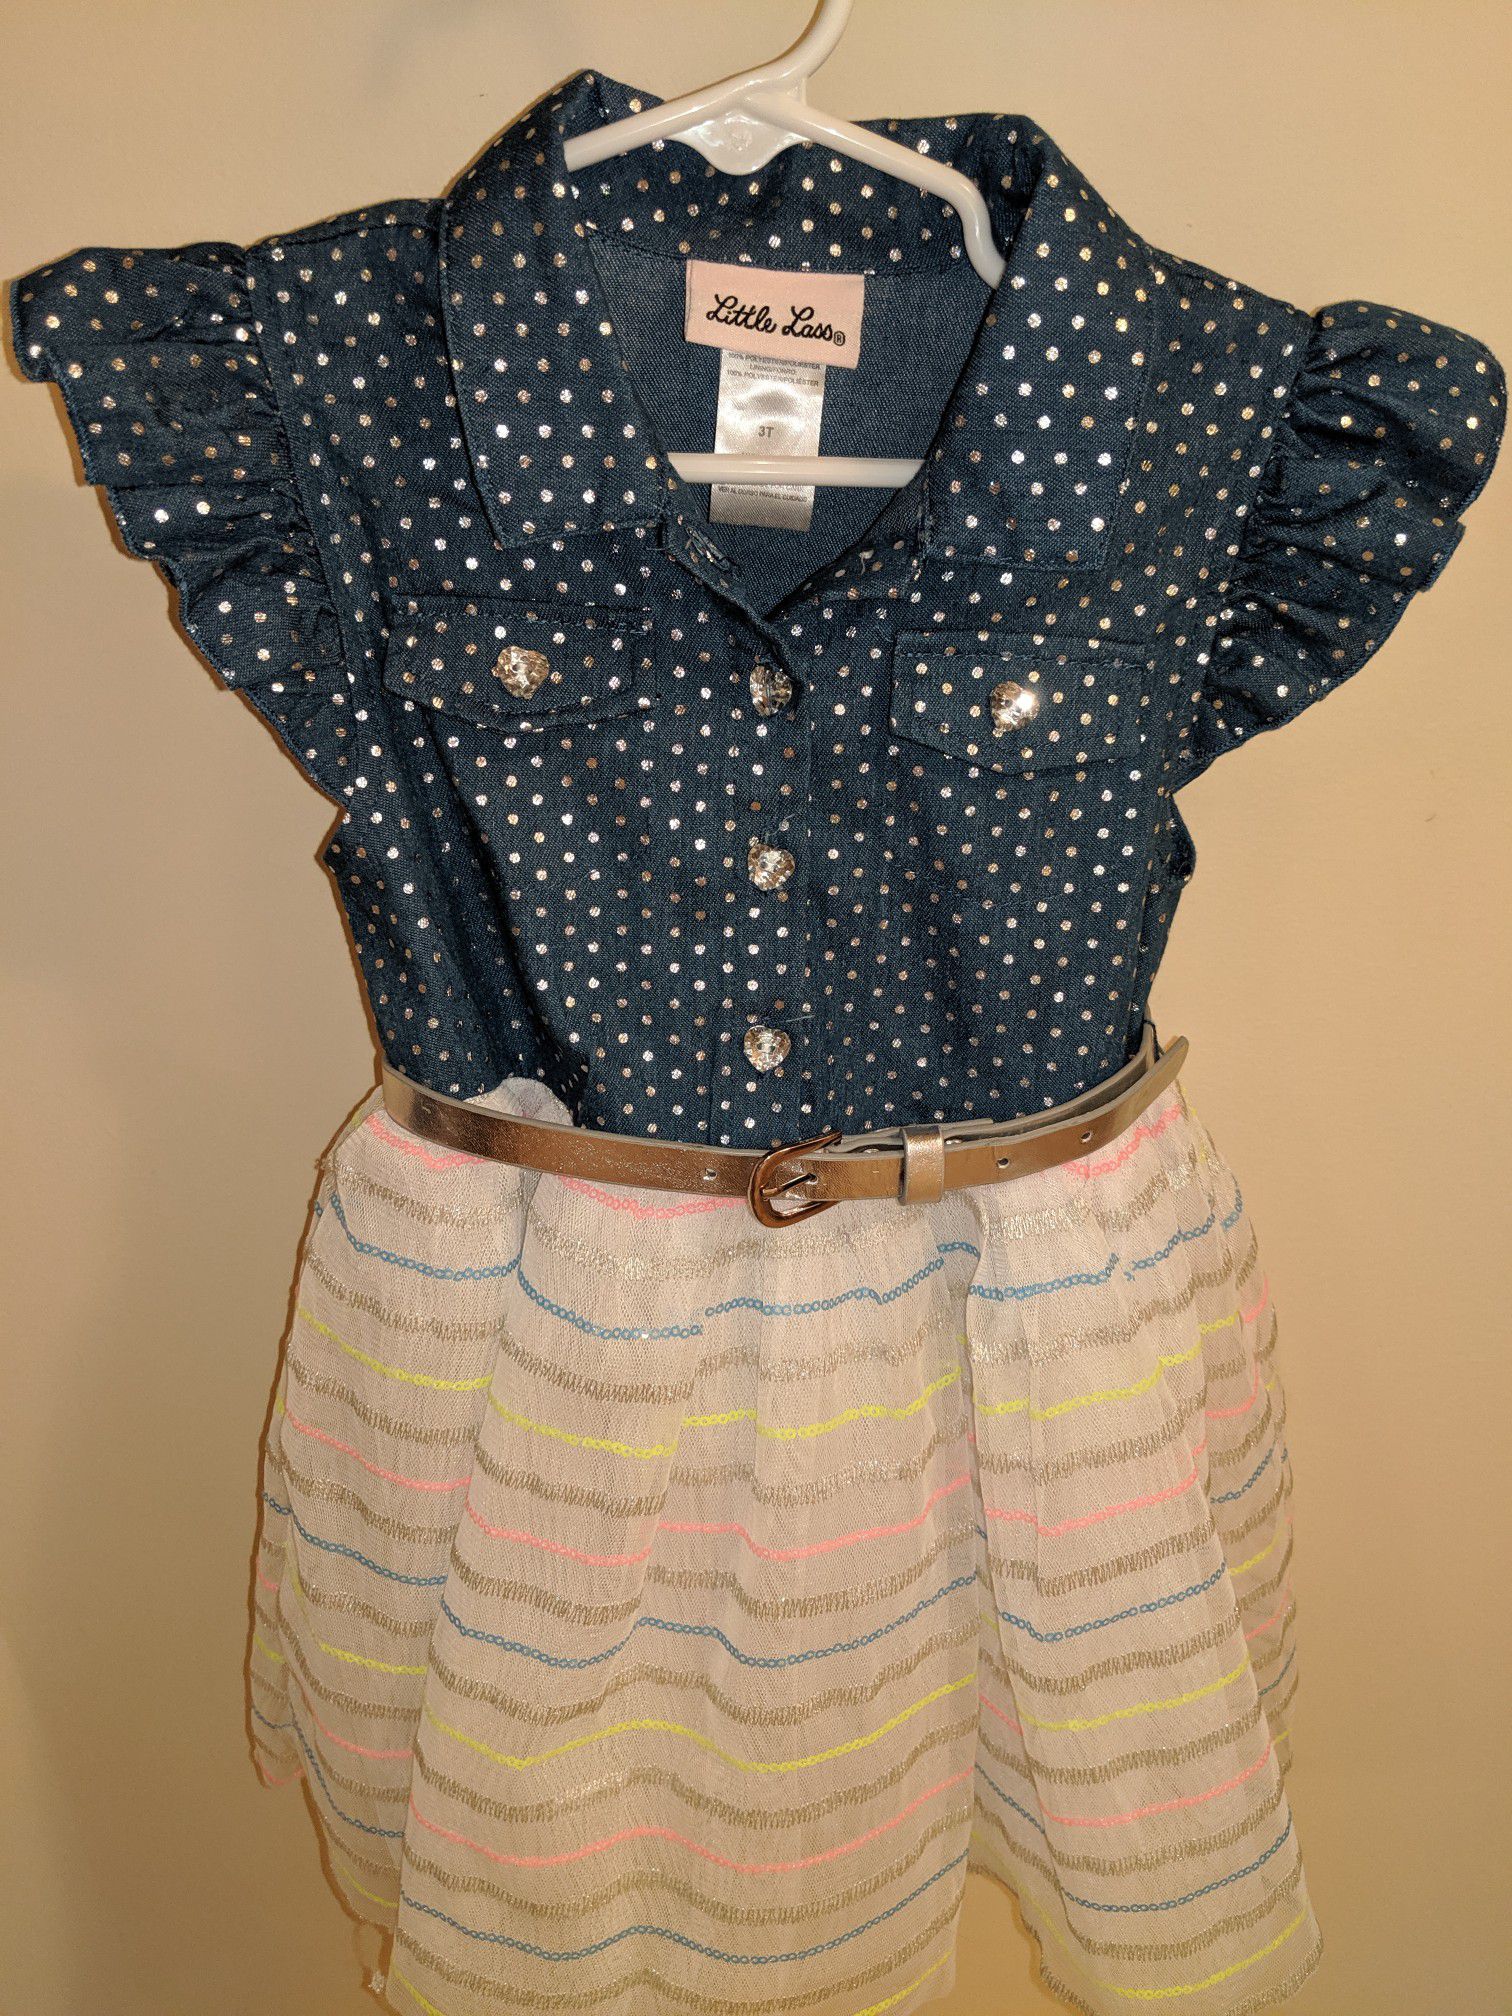 Like New! Denim Top, Tulle bottom, Jewel buttoned, size 3T party dress!